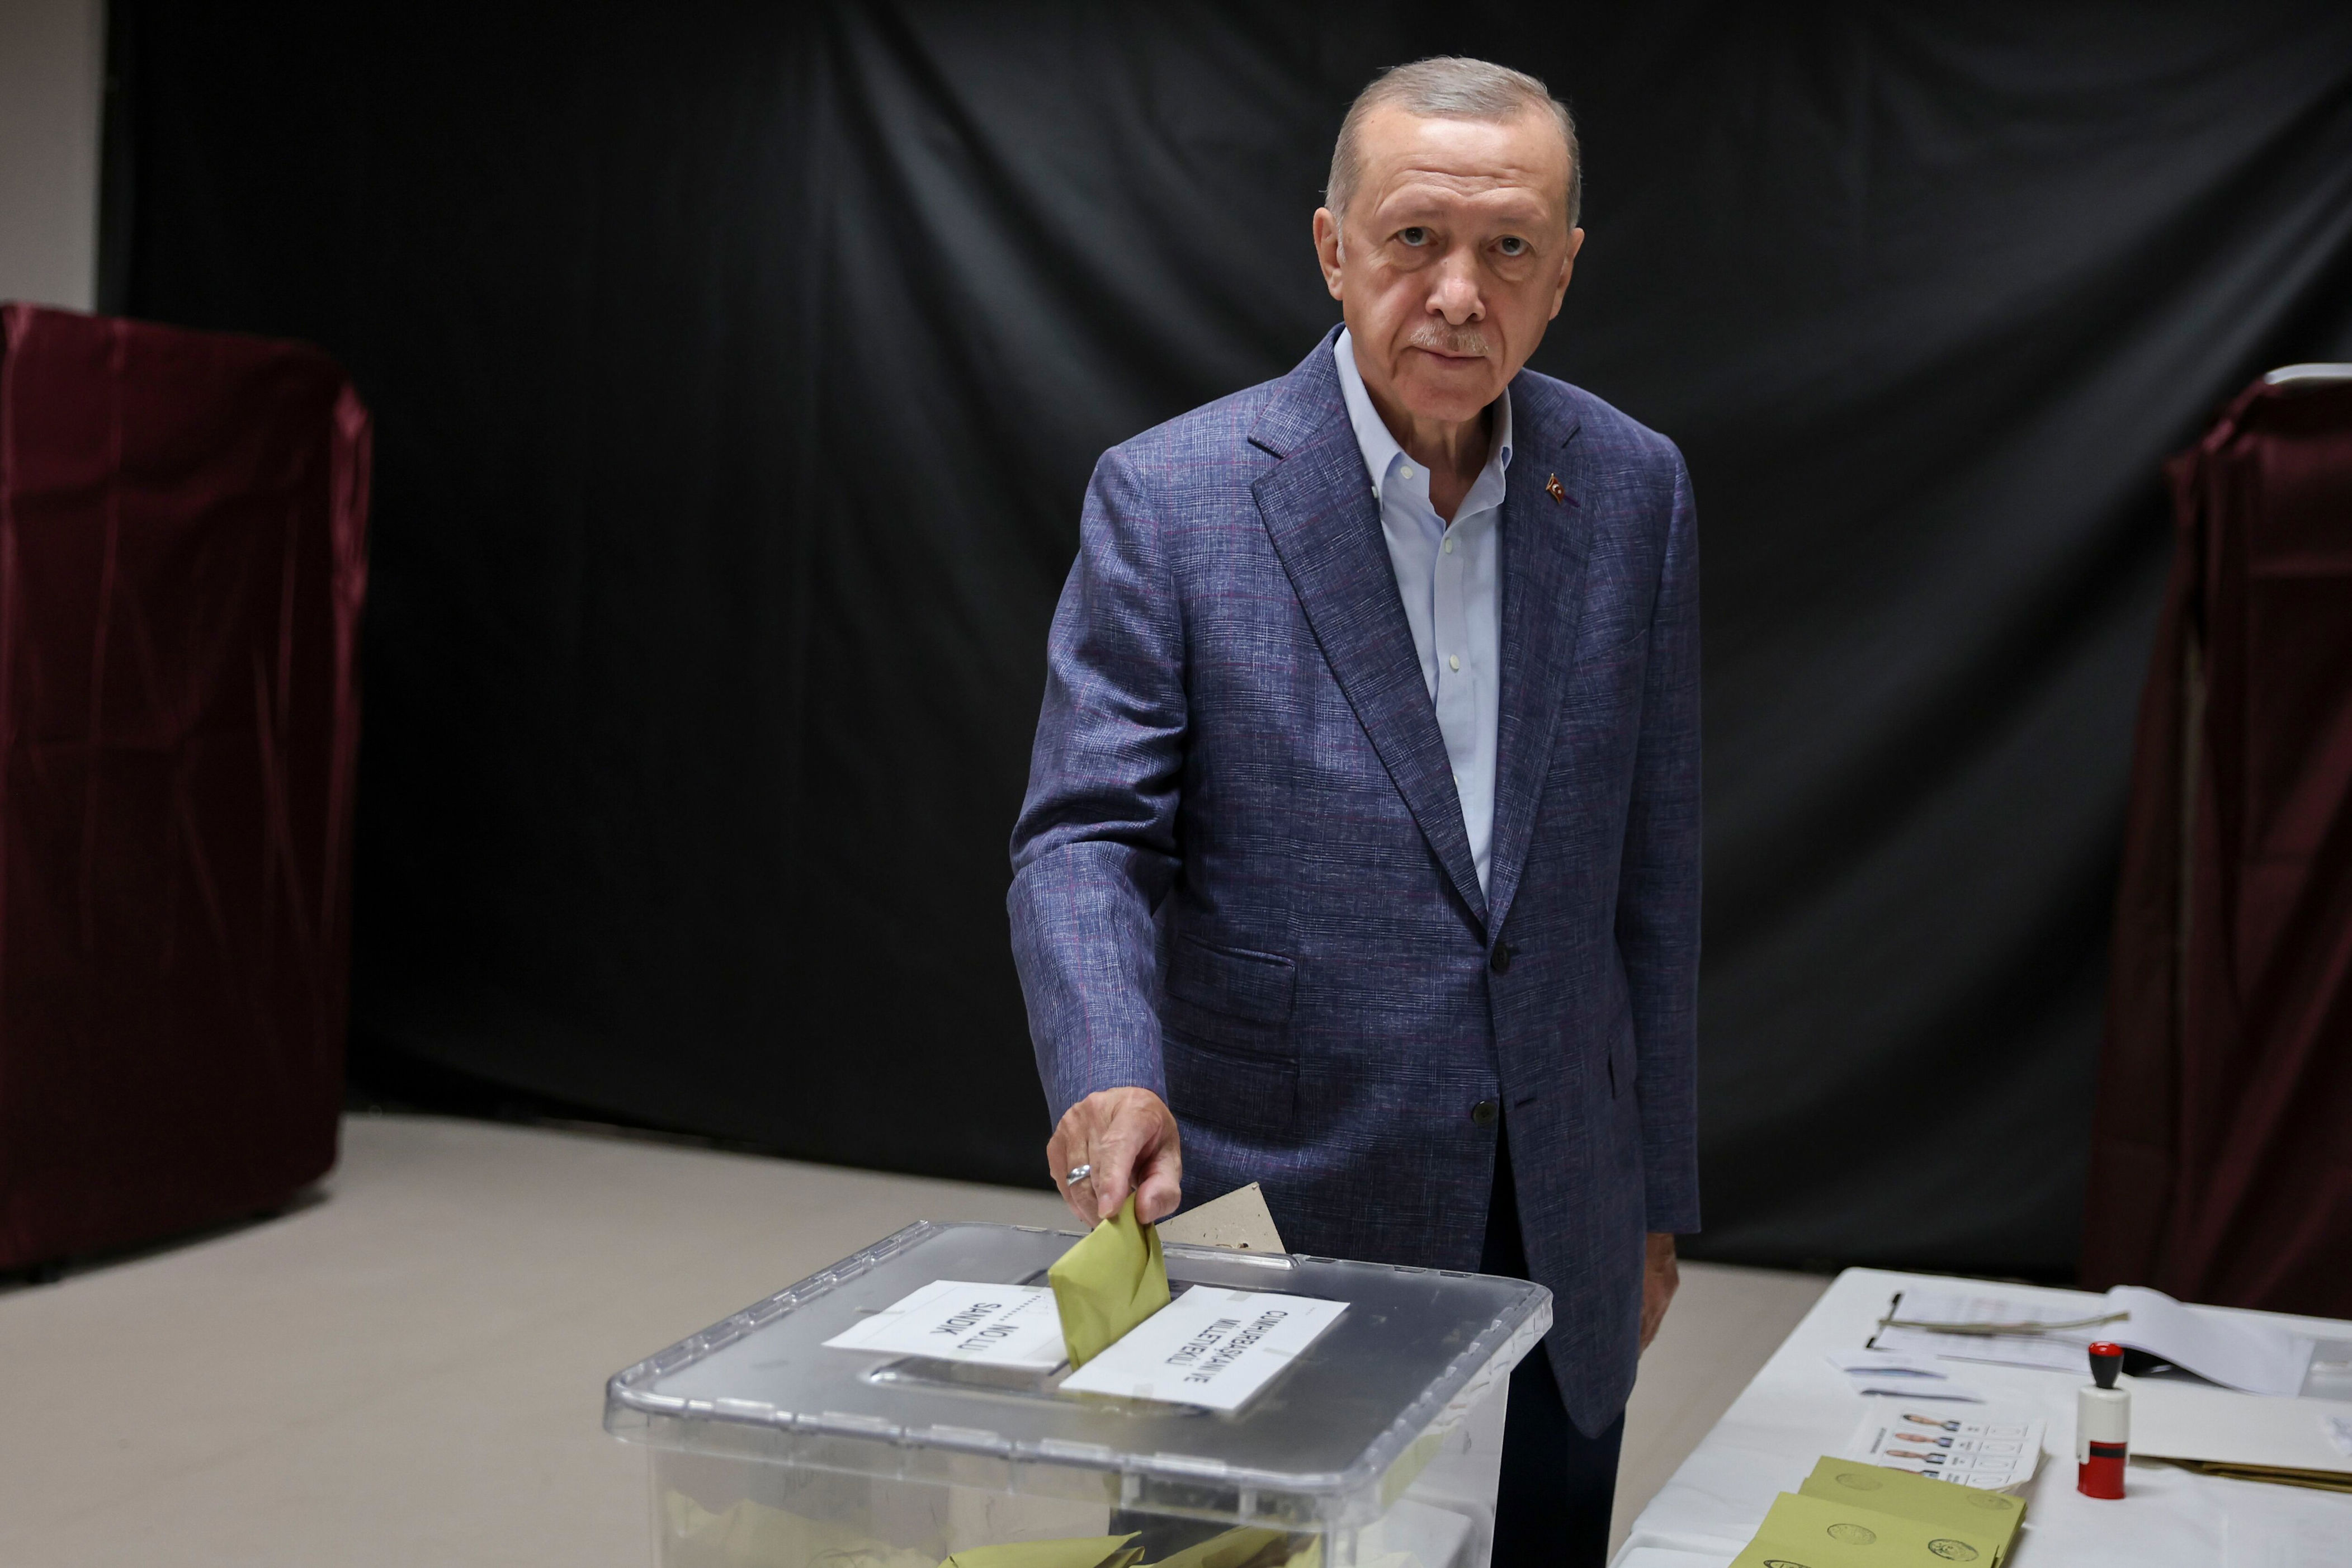 turkish election rivals make final push for votes before run-off